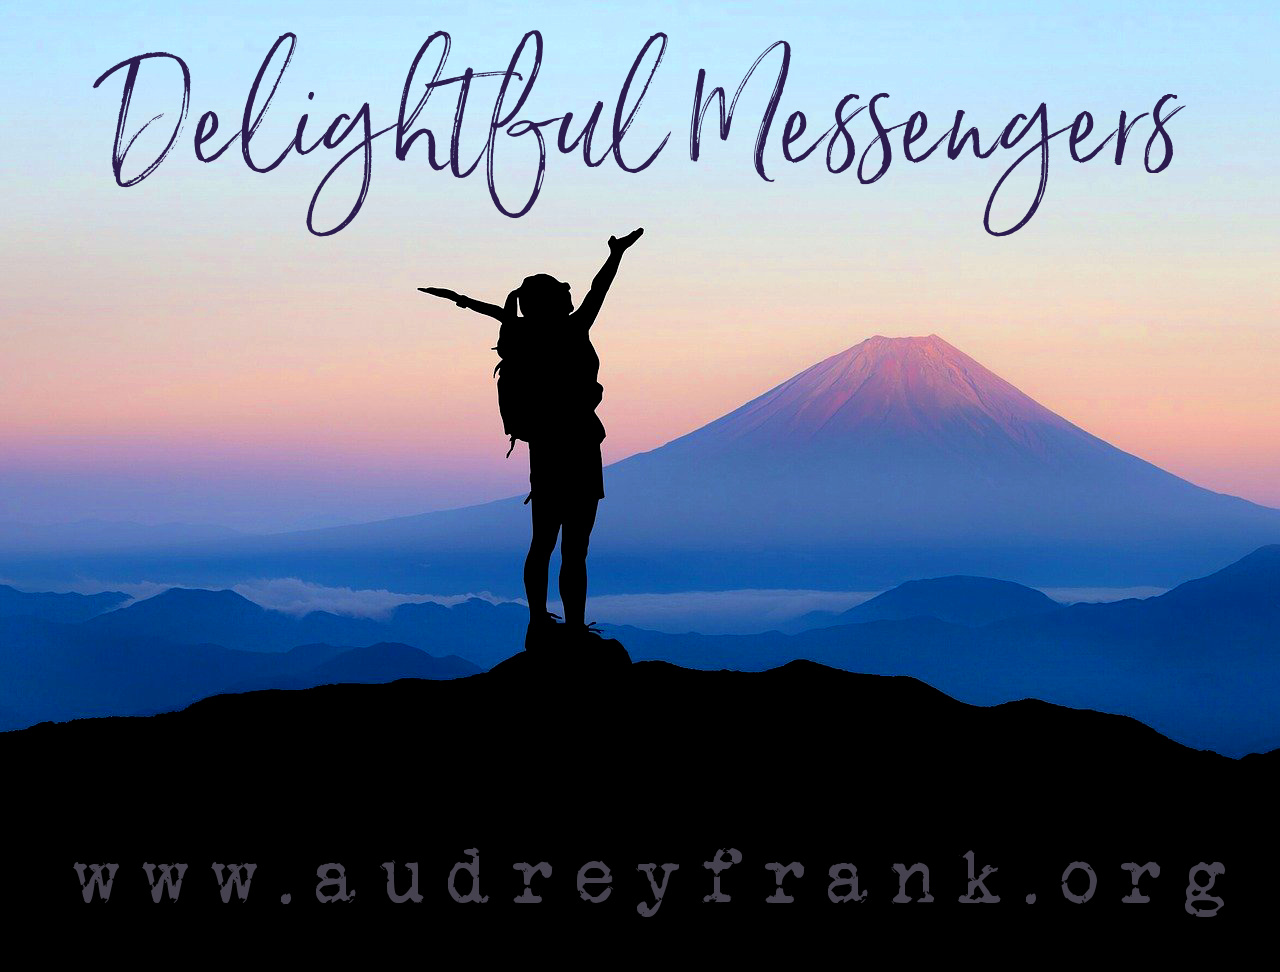 The silhouette of a person standing on a mountaintop, with the words Delightful Messenger describing the topic of the post.